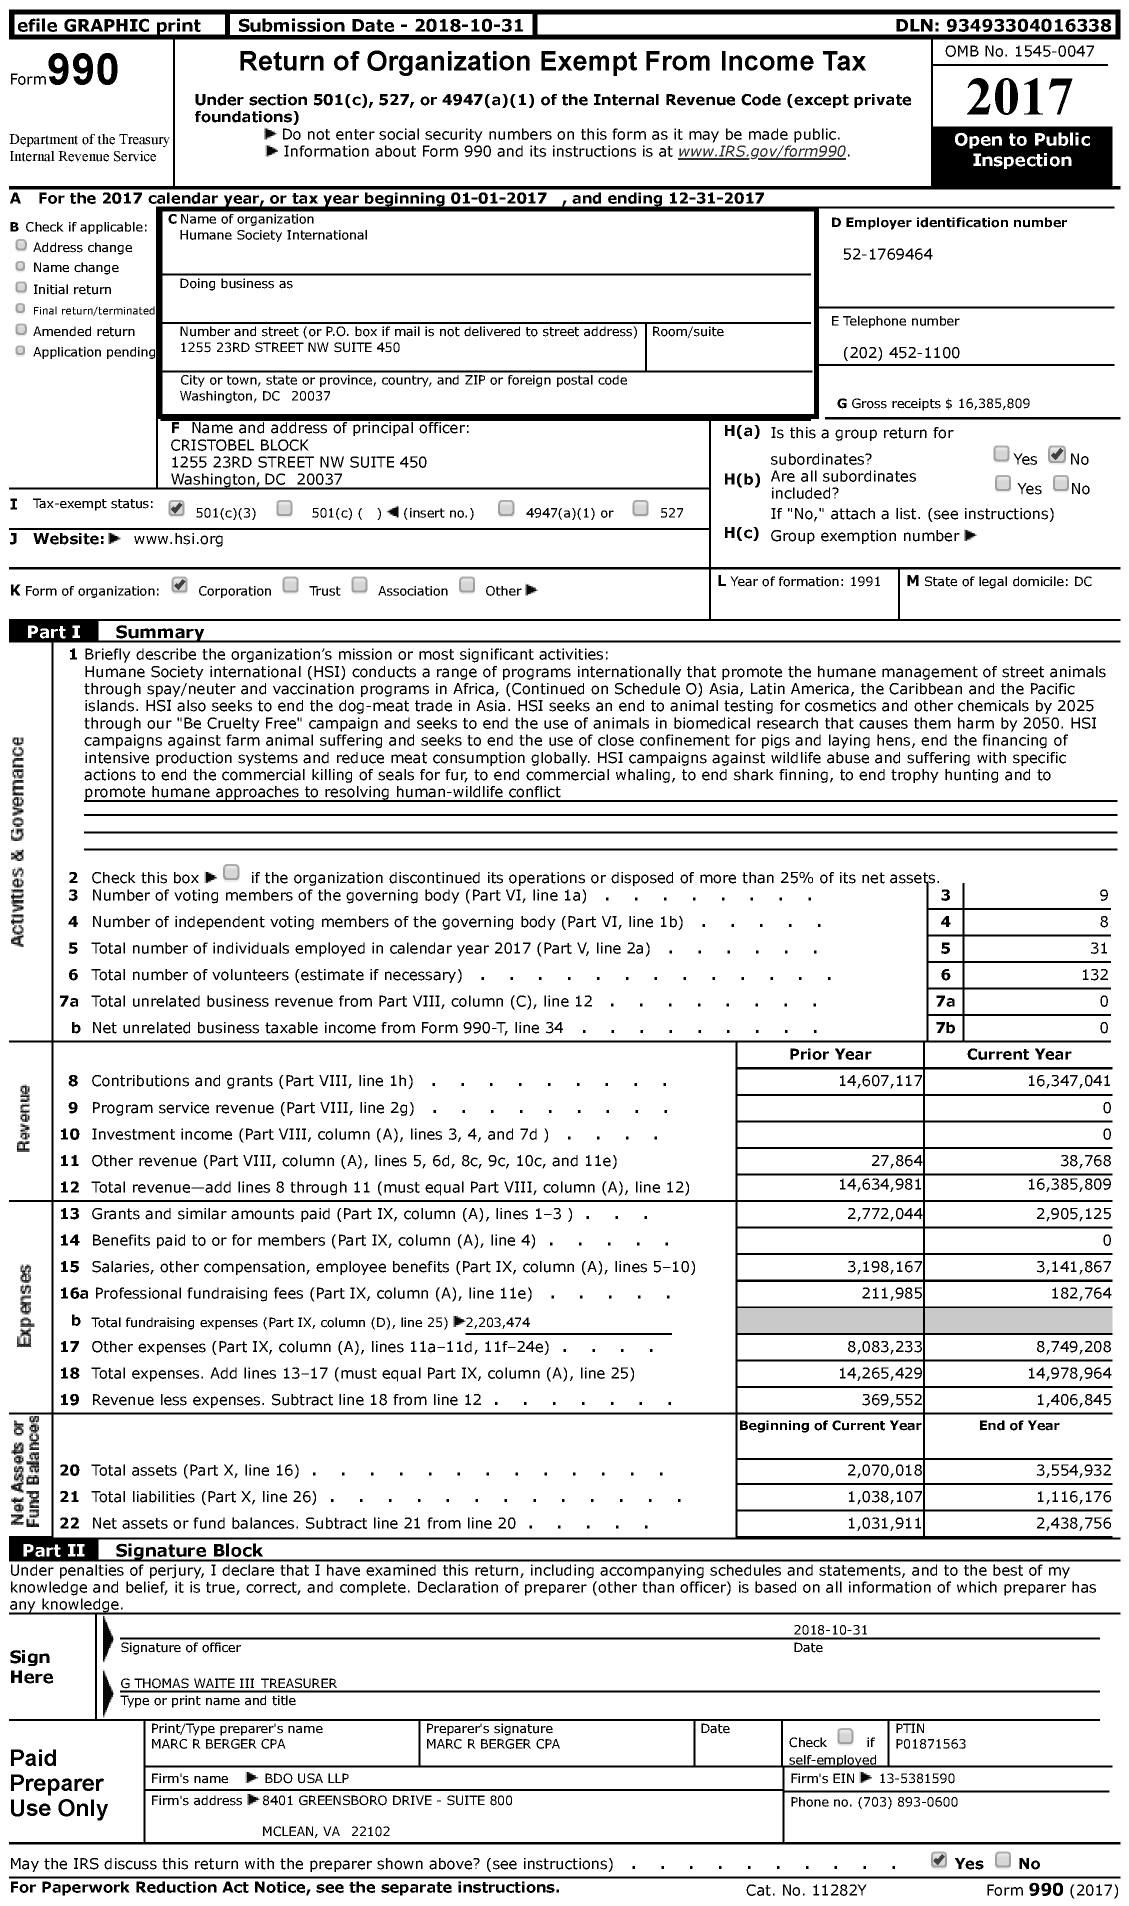 Image of first page of 2017 Form 990 for Humane Society International (HSI)